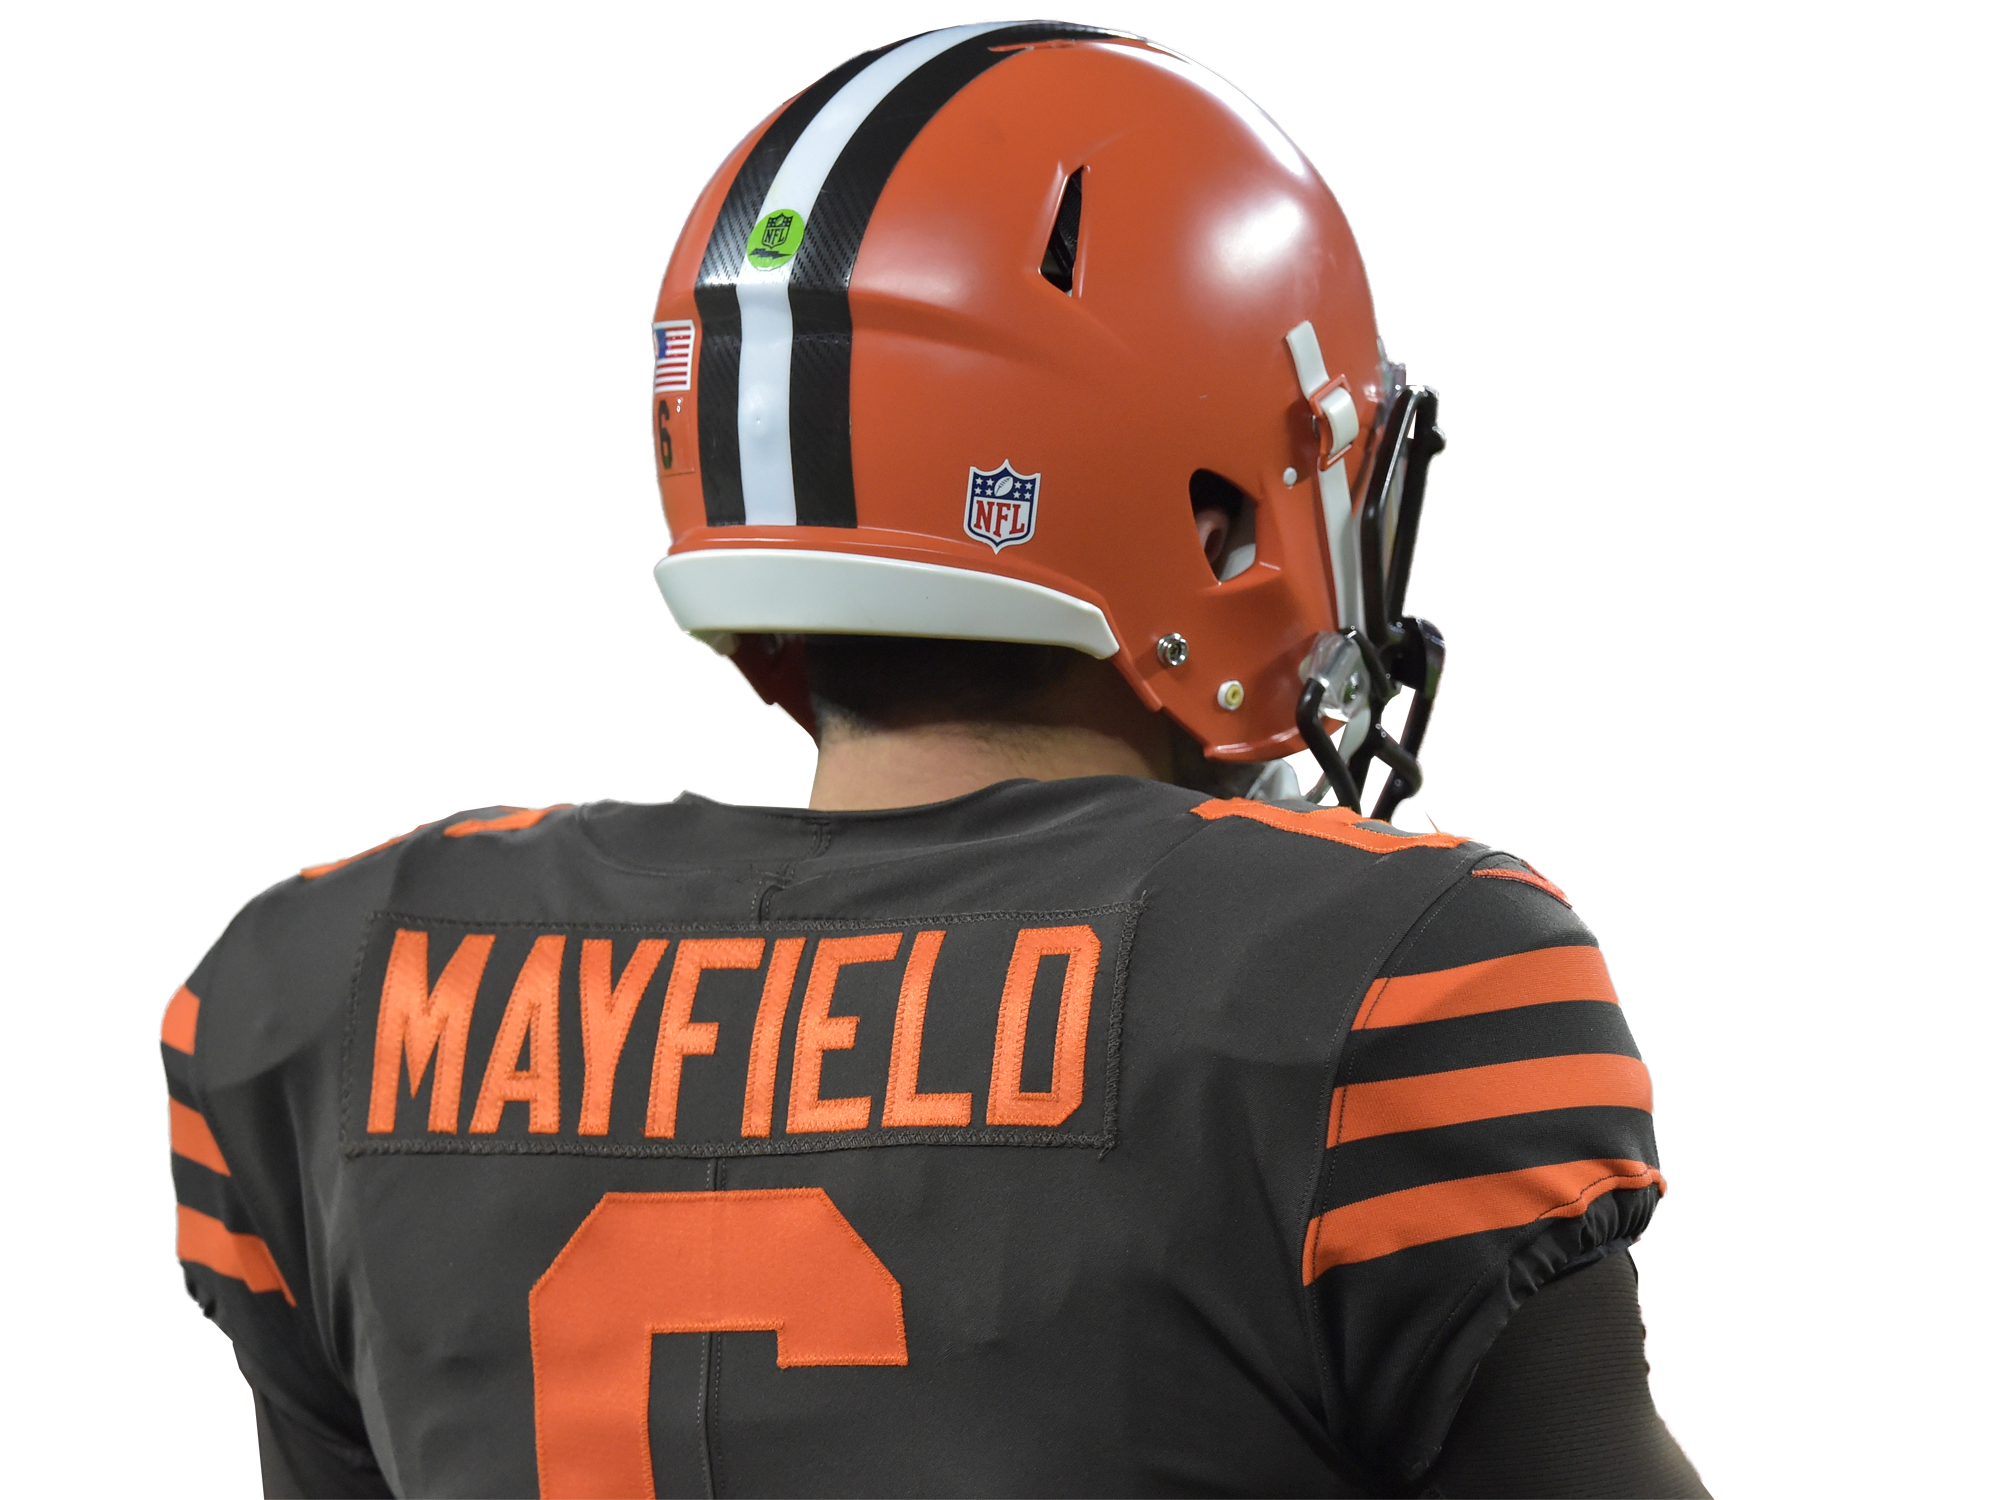 Ad agency replaces Browns quarterback jersey with Baker Mayfield's No. 6